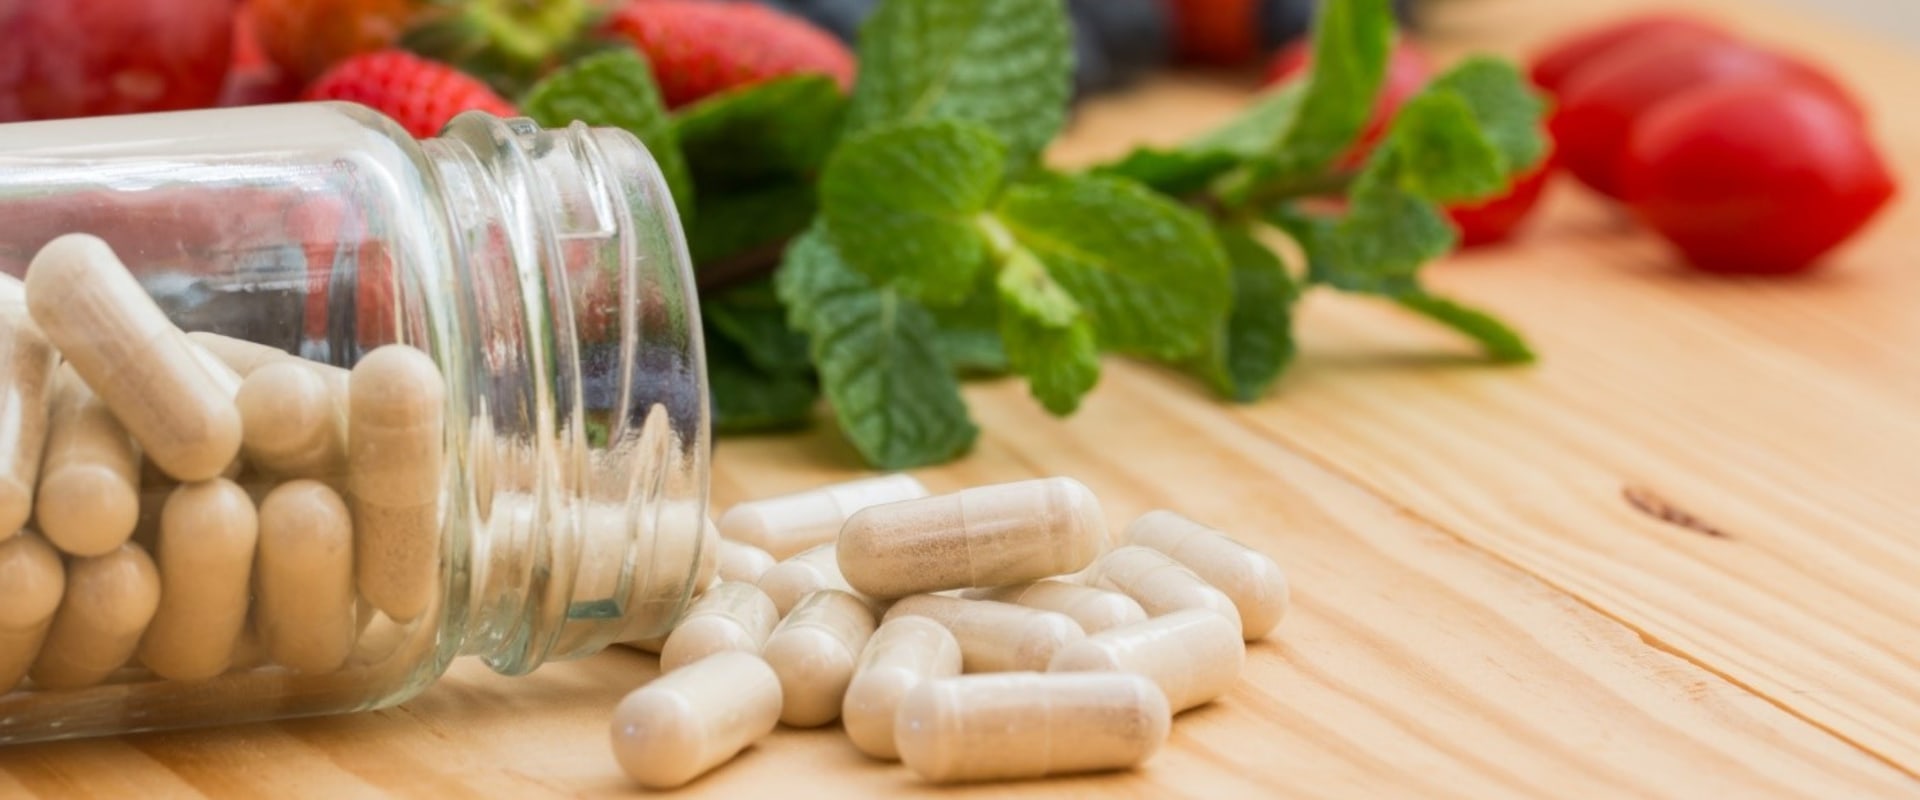 What Are the Special Storage Requirements for Nutritional Supplements?